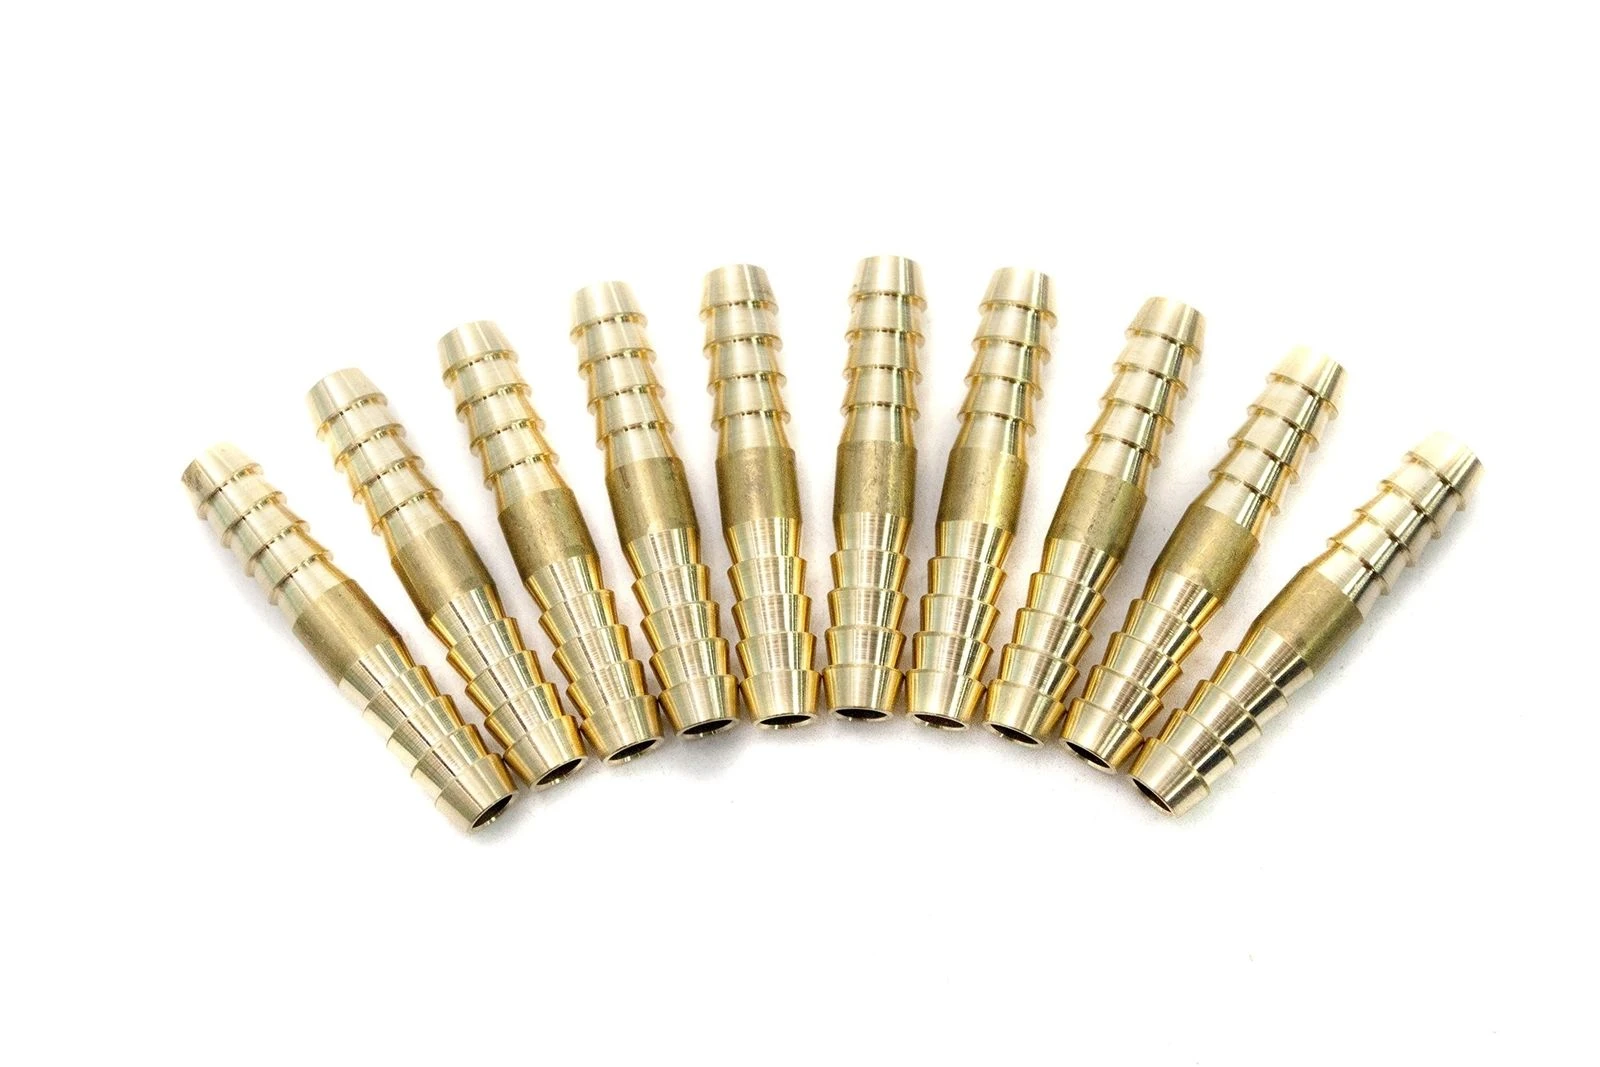 1pcs 20mm Brass Barb Splicer Mender Straight Pipe Connector Prcatical Brass Straight Barbed Connector Brass Hose Fitting for Water/Fuel/Air 